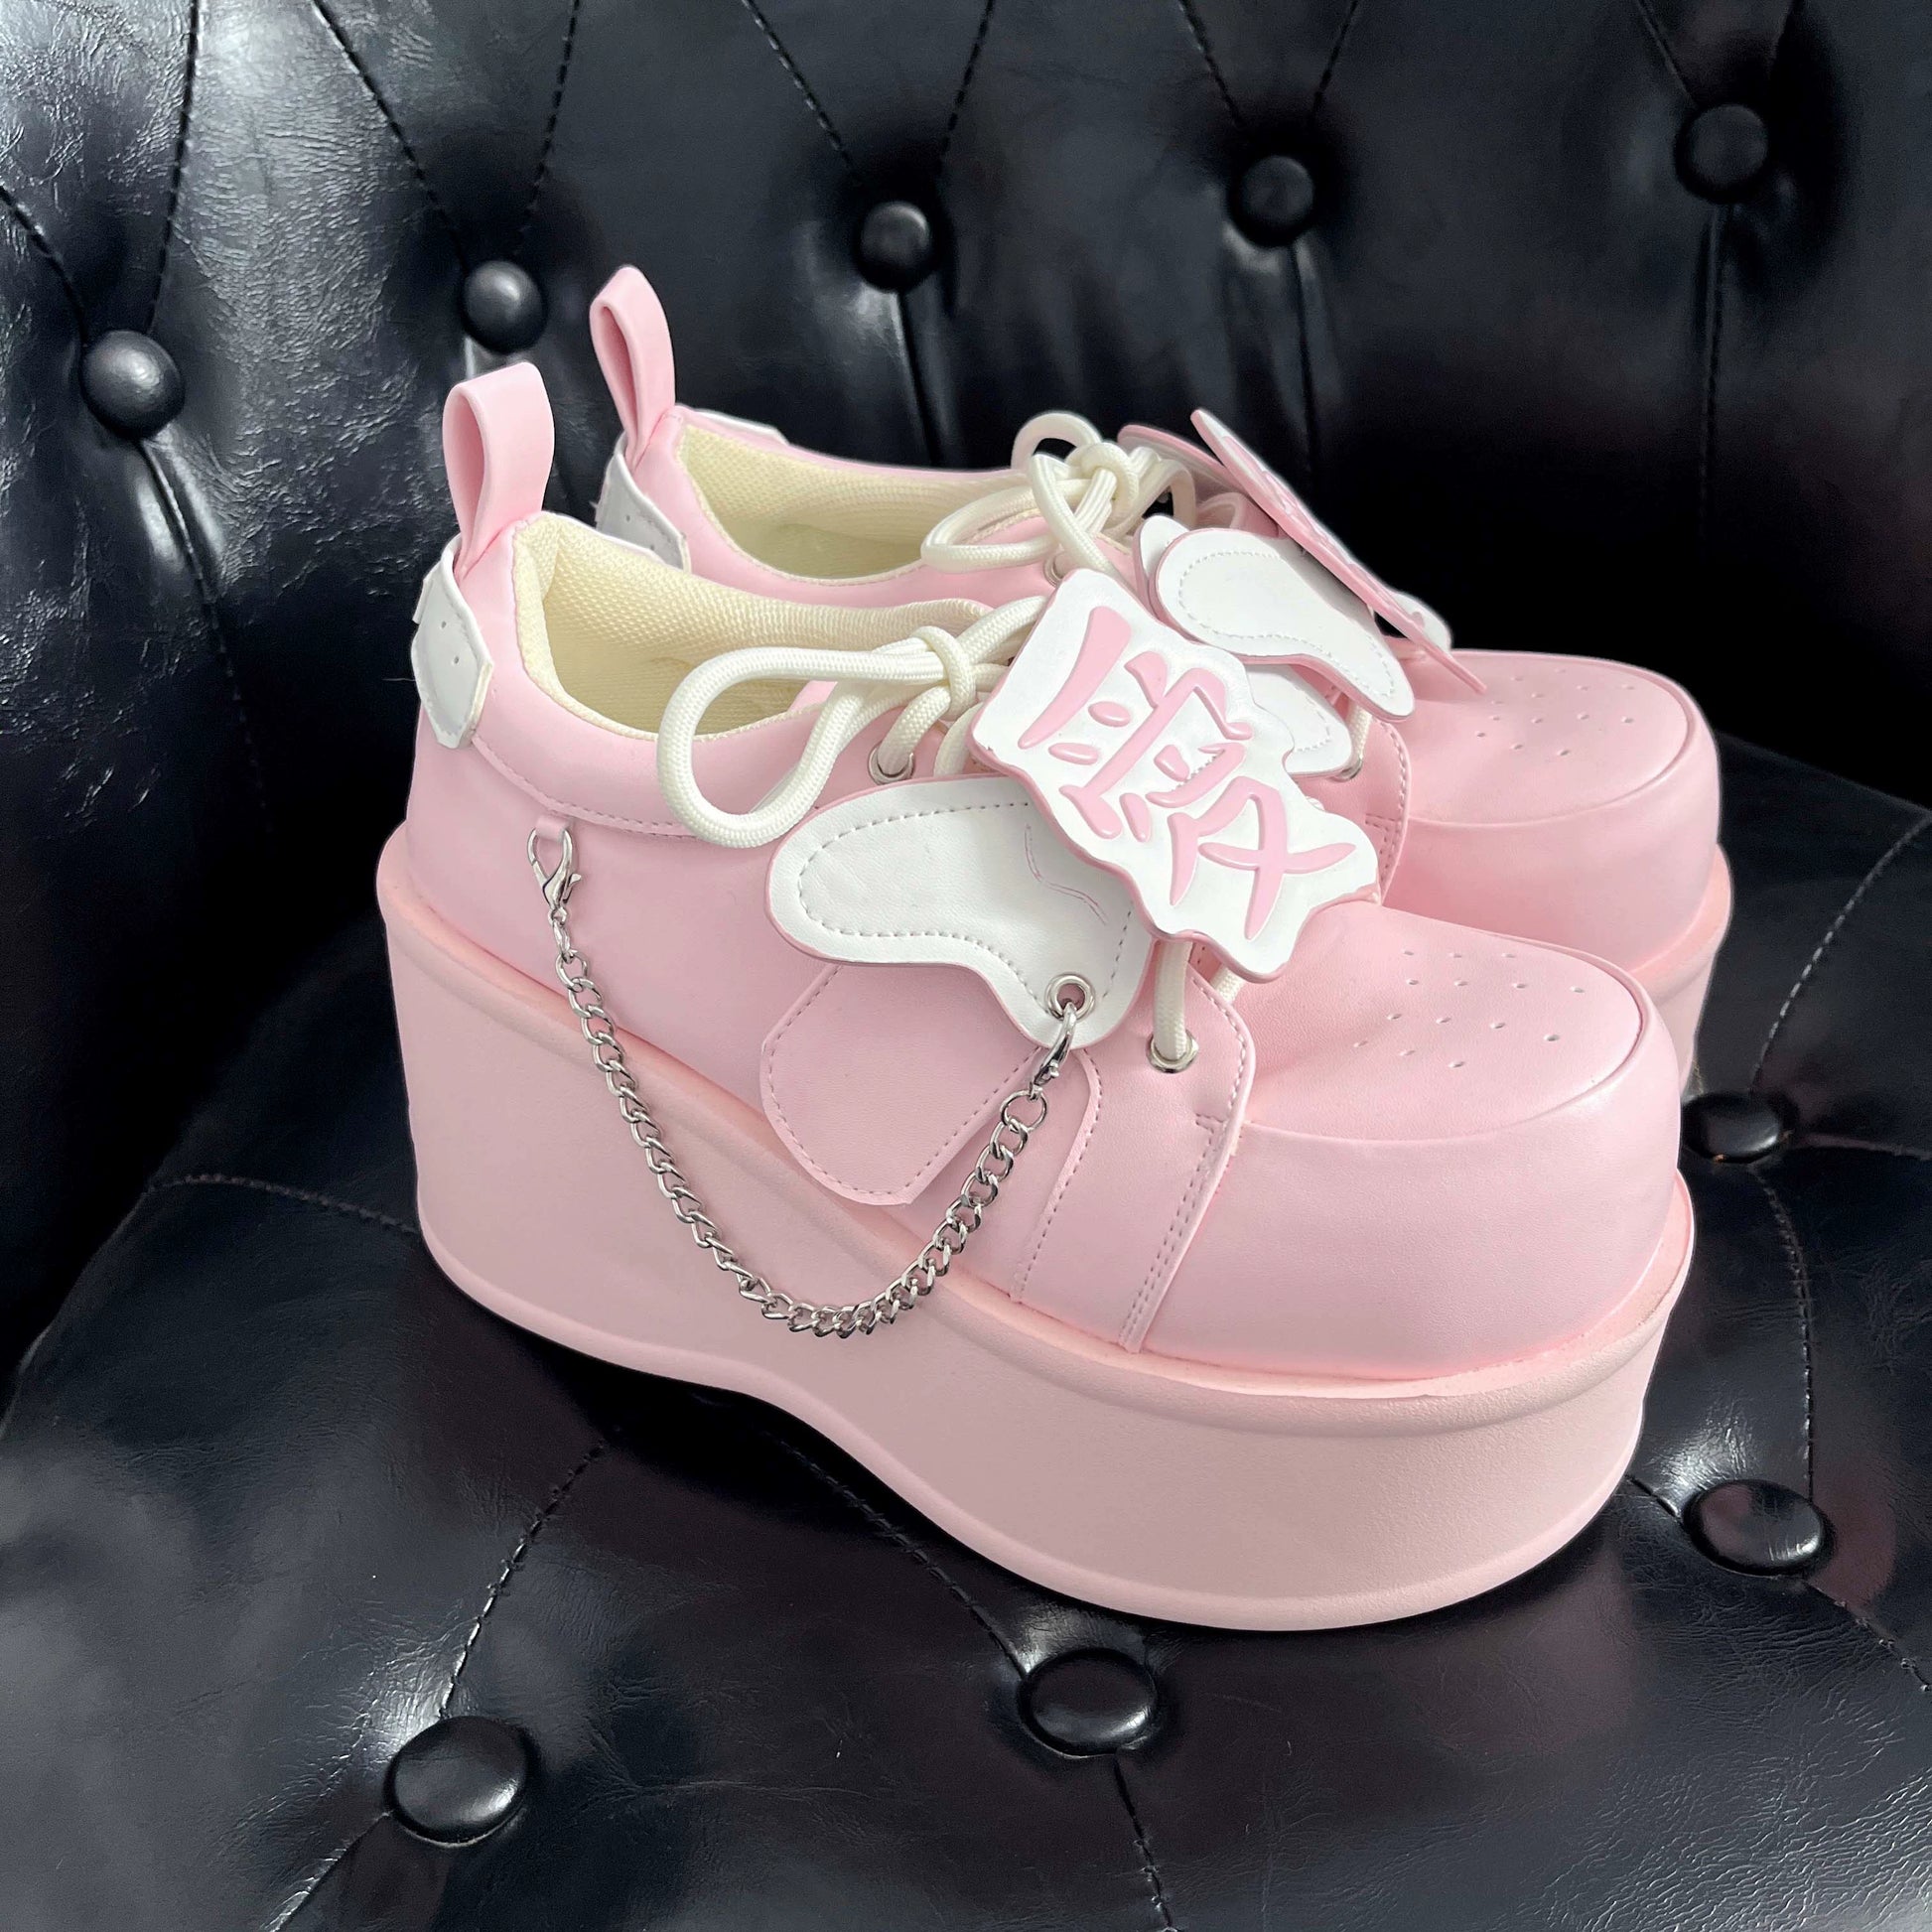 Tenshi Kaiwai Platform Shoes Subculture Thick-soled Shoes 35748:503458 35748:503458